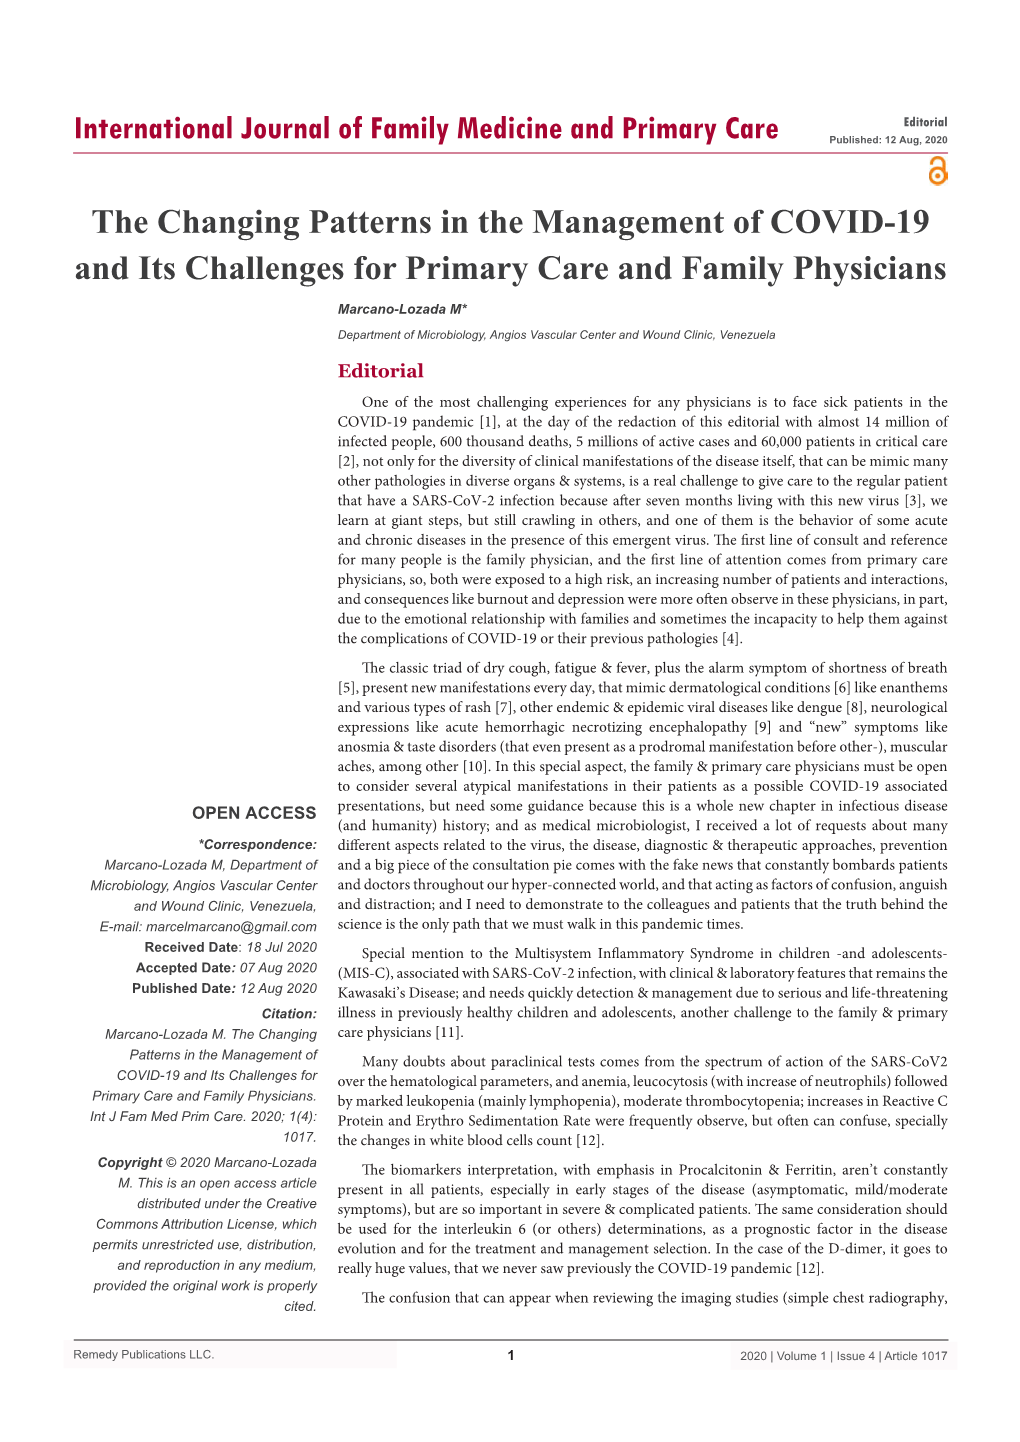 The Changing Patterns in the Management of COVID-19 and Its Challenges for Primary Care and Family Physicians